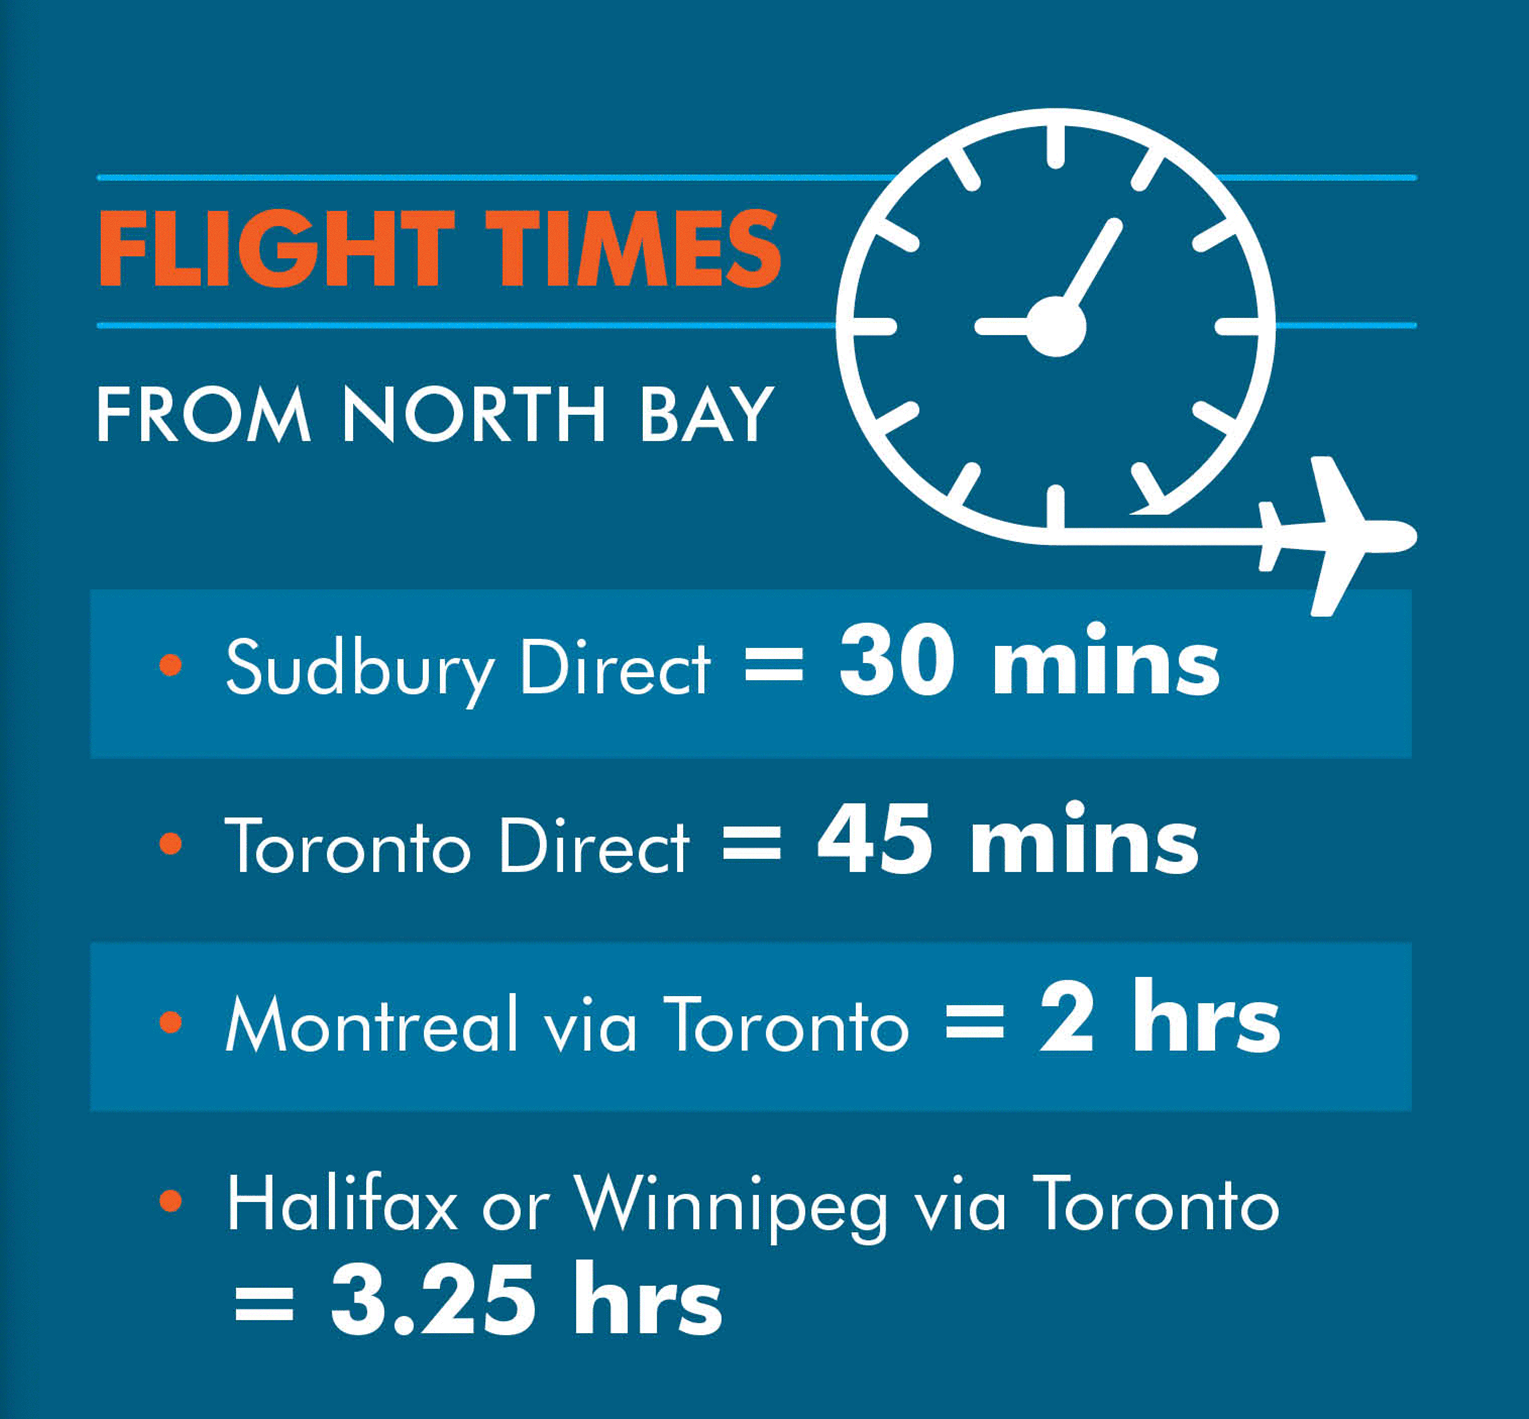 Quick flight times from North Bay. Direct routes and routes via Toronto.